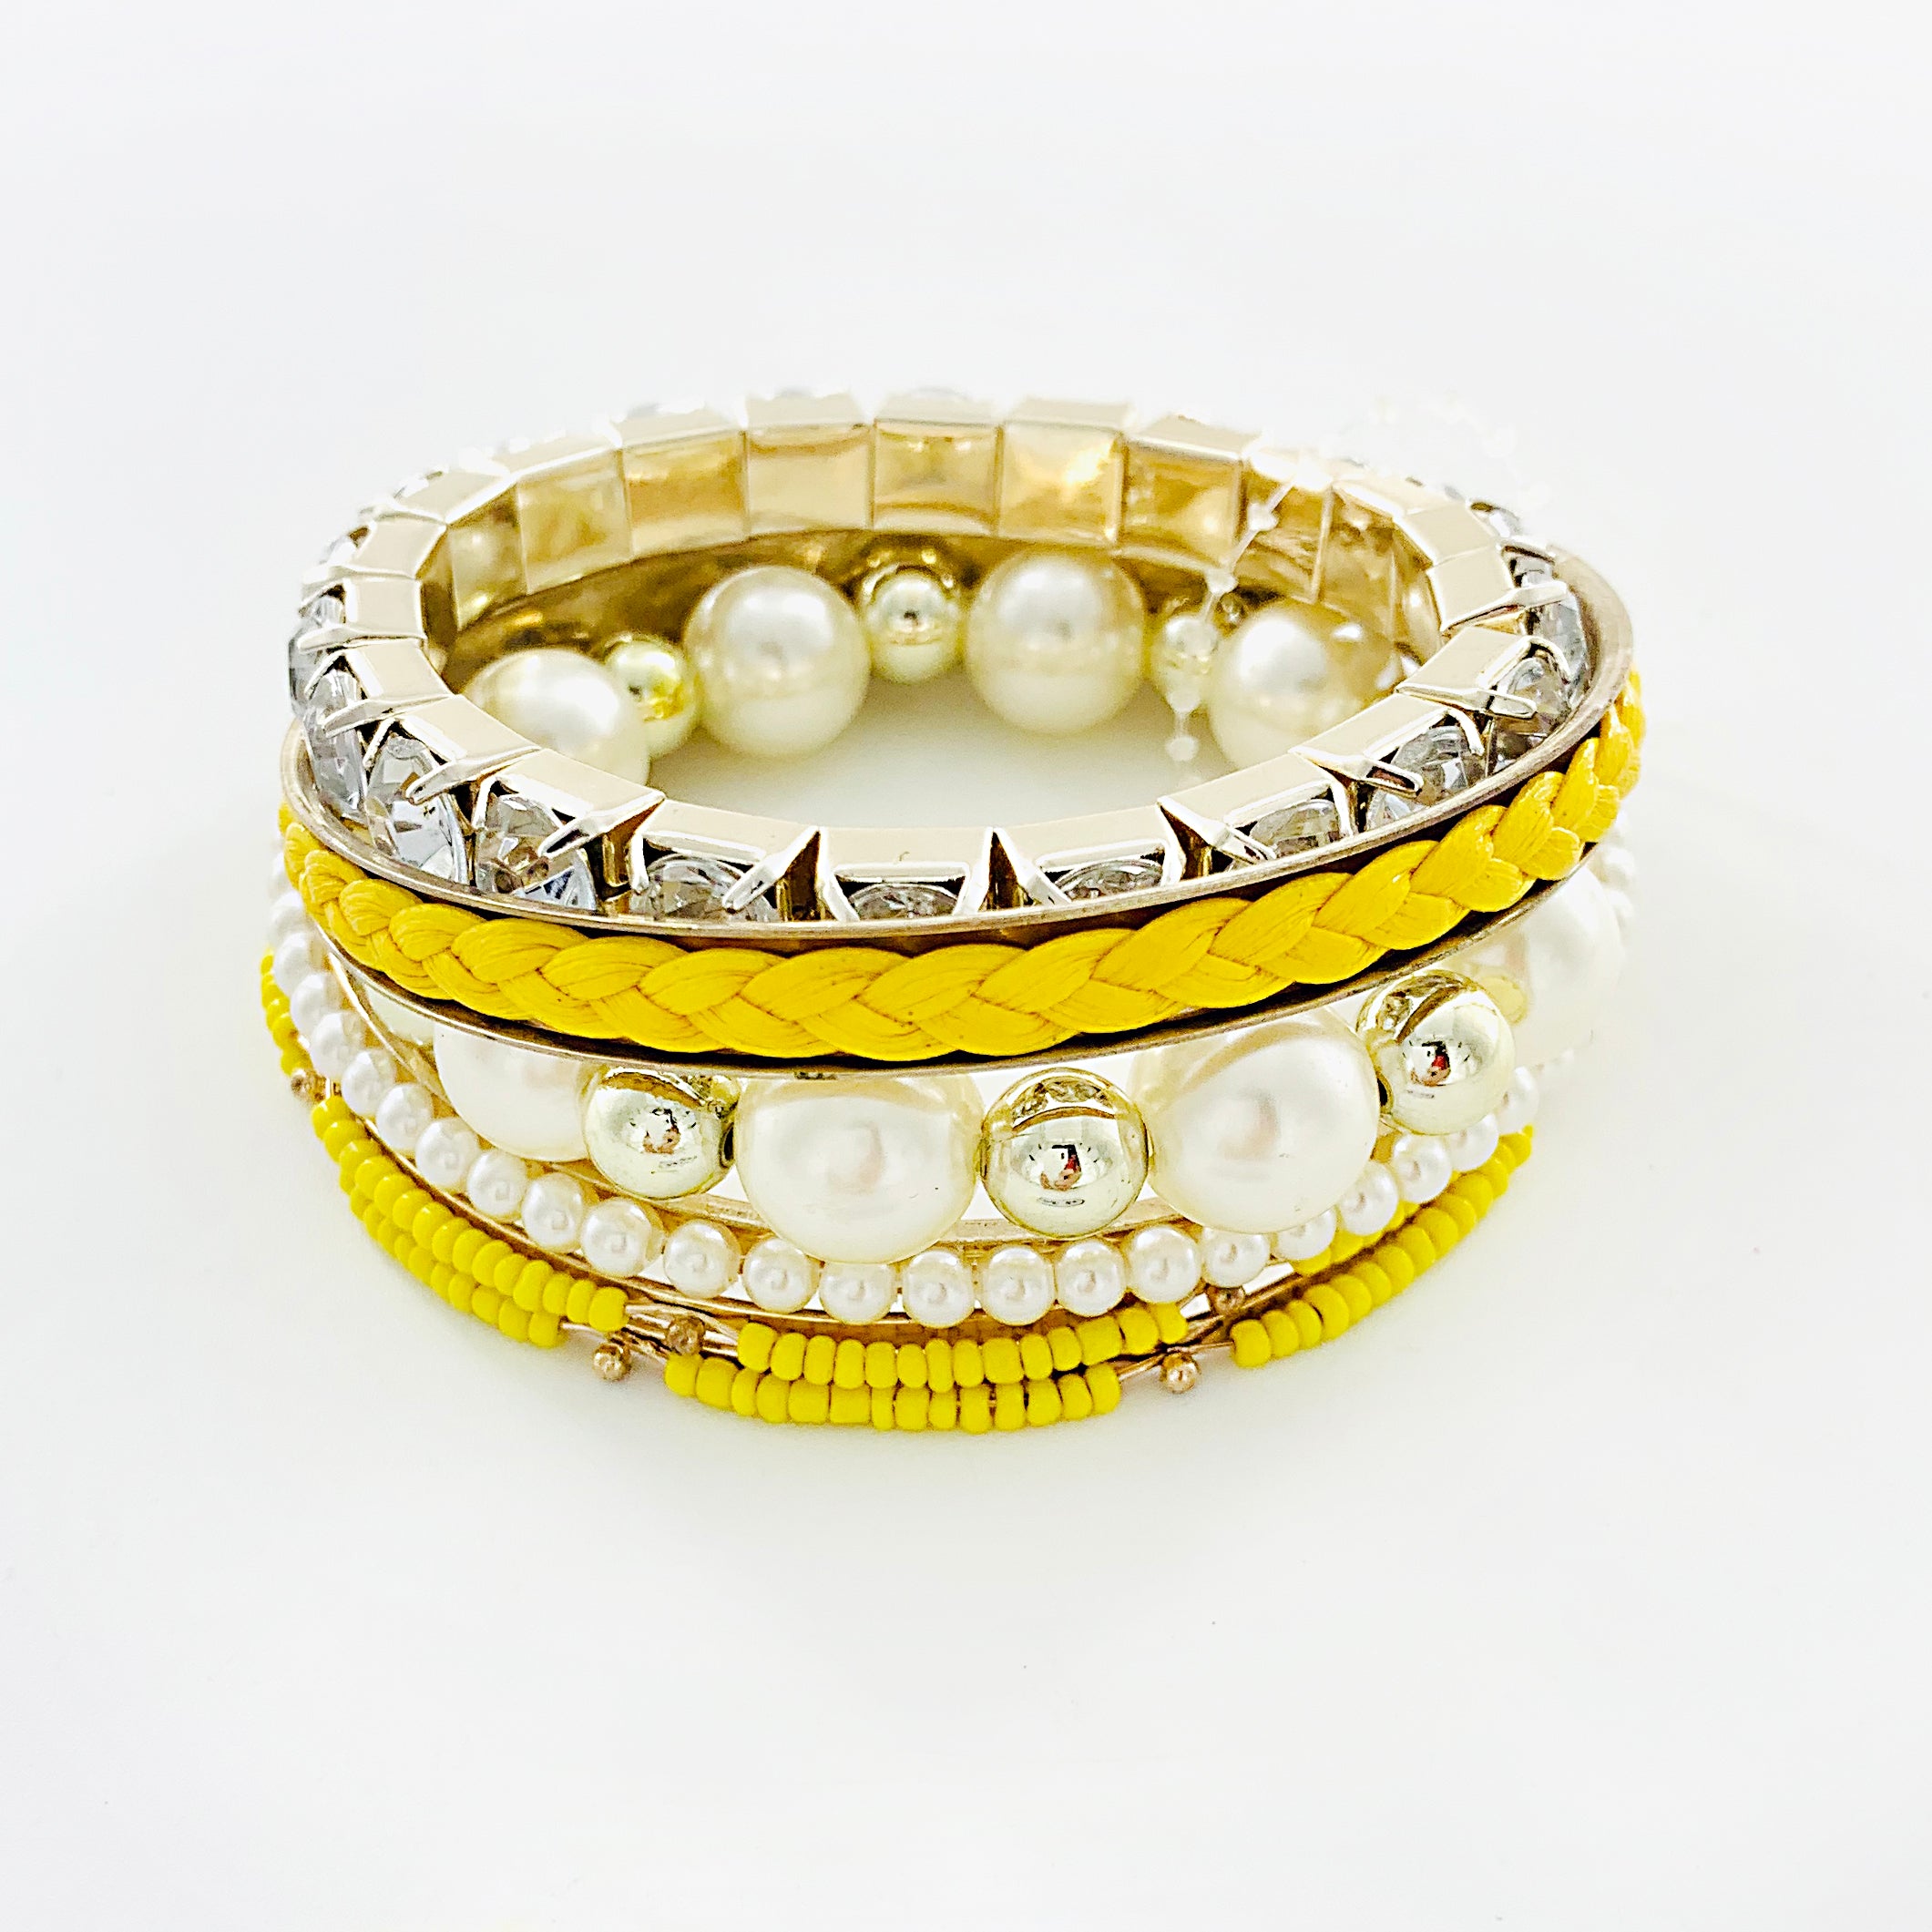 Gold Bangles with Yellow beads, Pearls and Diamante stones